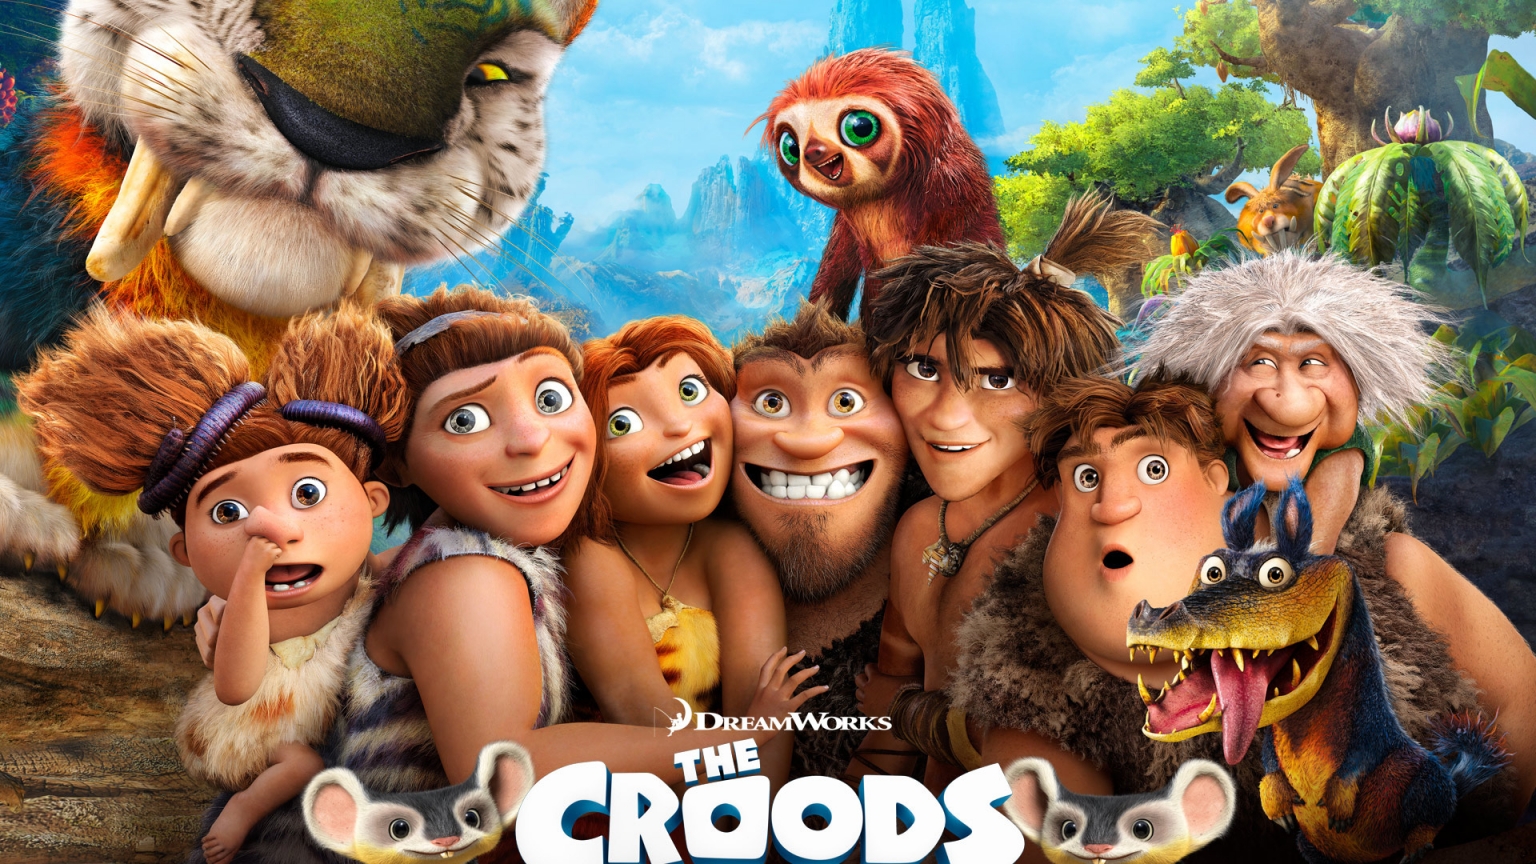 The Croods for 1536 x 864 HDTV resolution